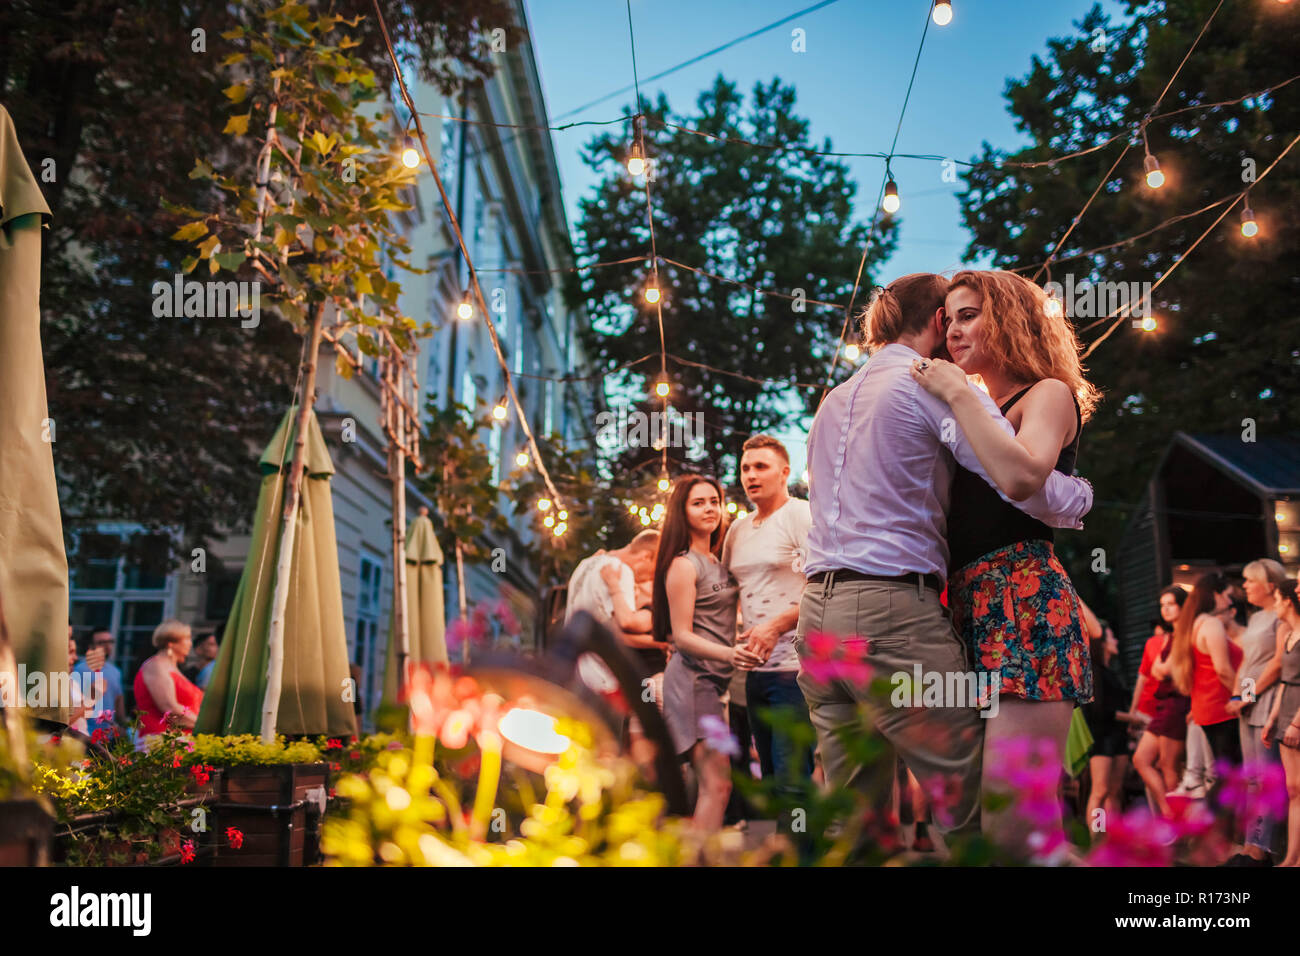 Lviv, Ukraine - June 9, 2018. People dancing salsa and bachata in outdoor cafe by Diana in Lviv Stock Photo